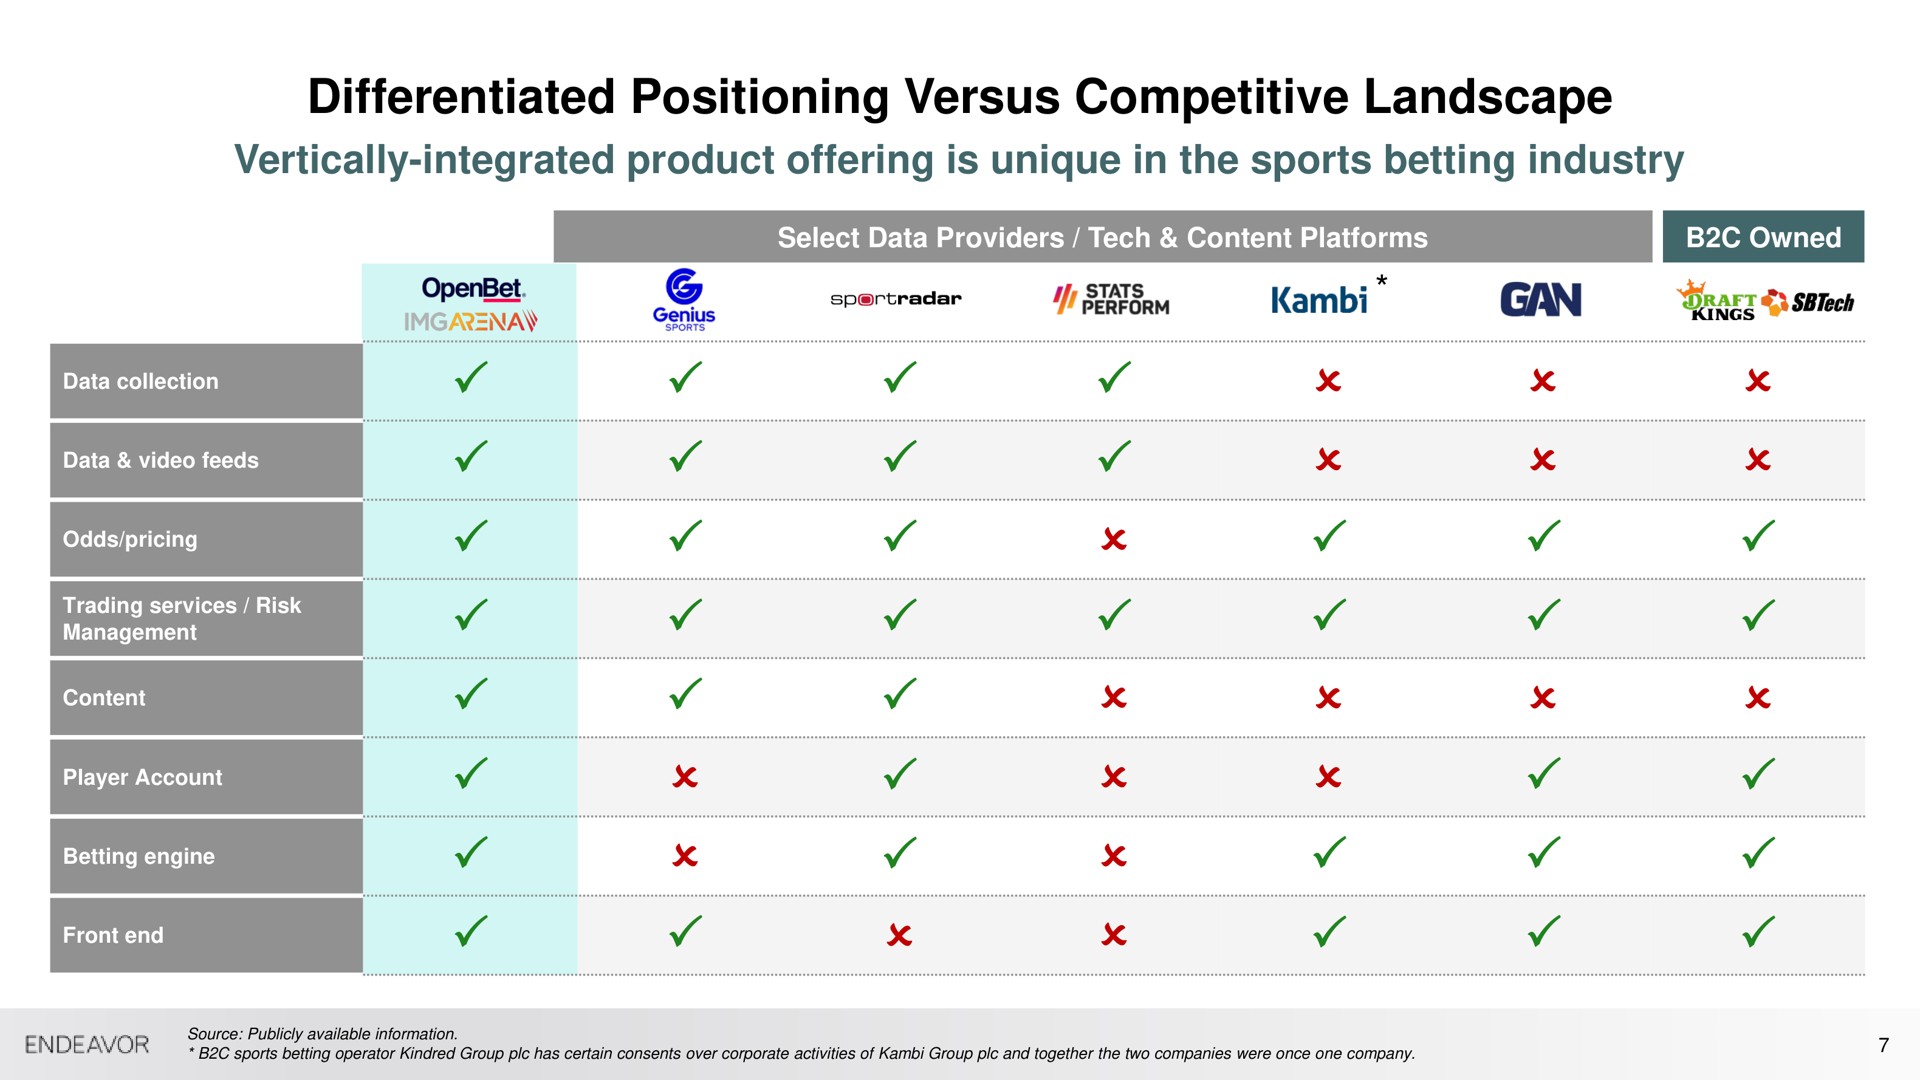 differentiated positioning versus competitive landscape | Endeavor Group